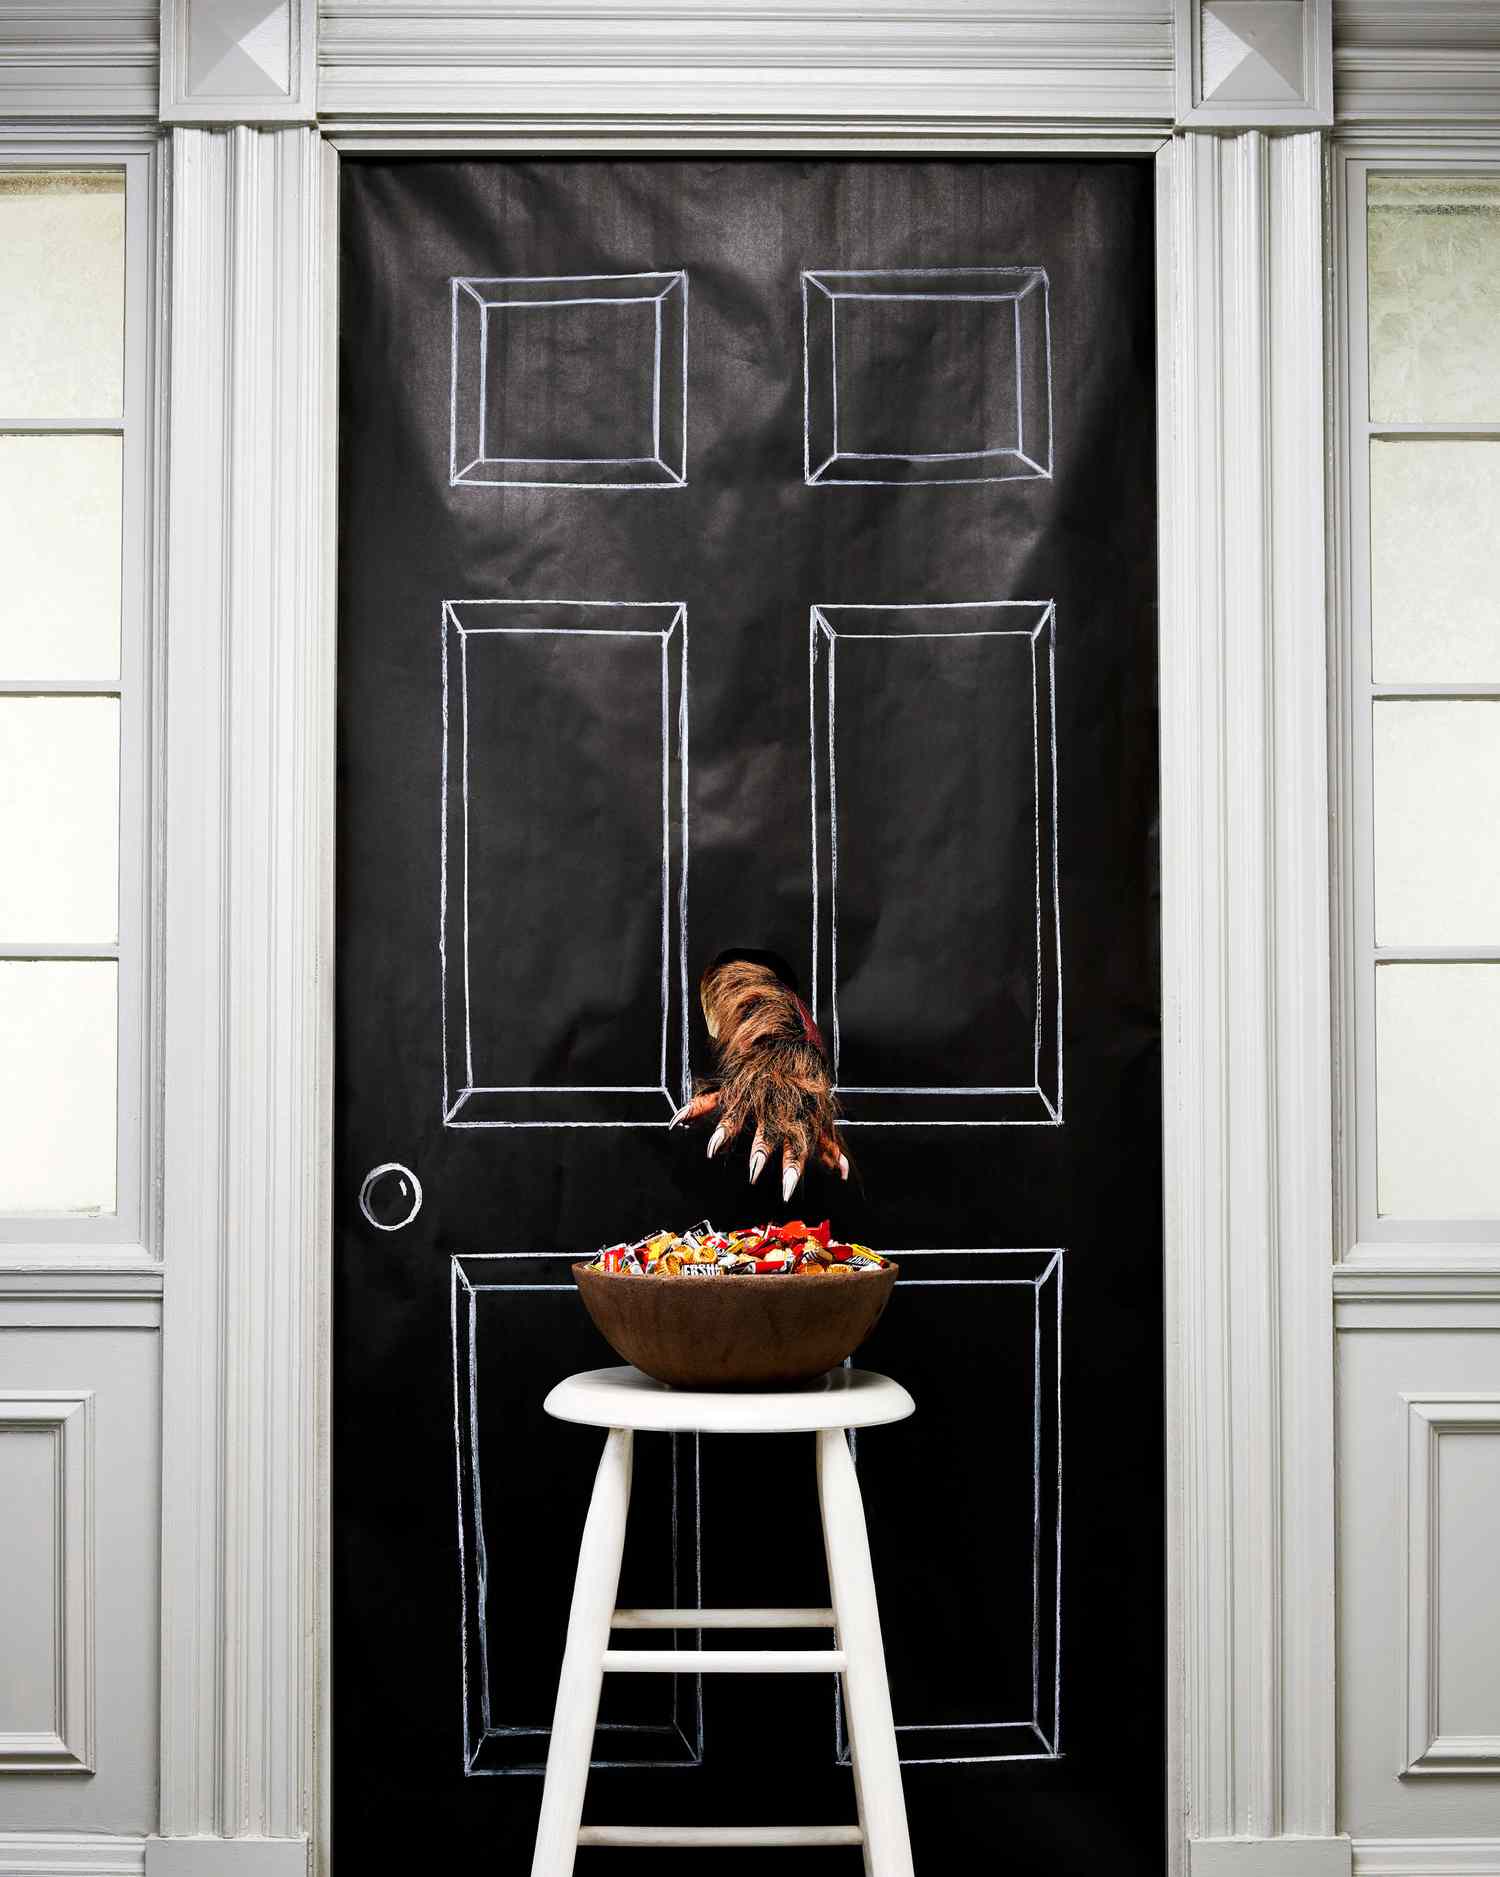 Halloween Decoration Outdoor,Scary Halloween Doorbell Decor,Halloween Door Decor with Spooky Sounds,Halloween Party Decoration,Trick or Treat Event for Kids